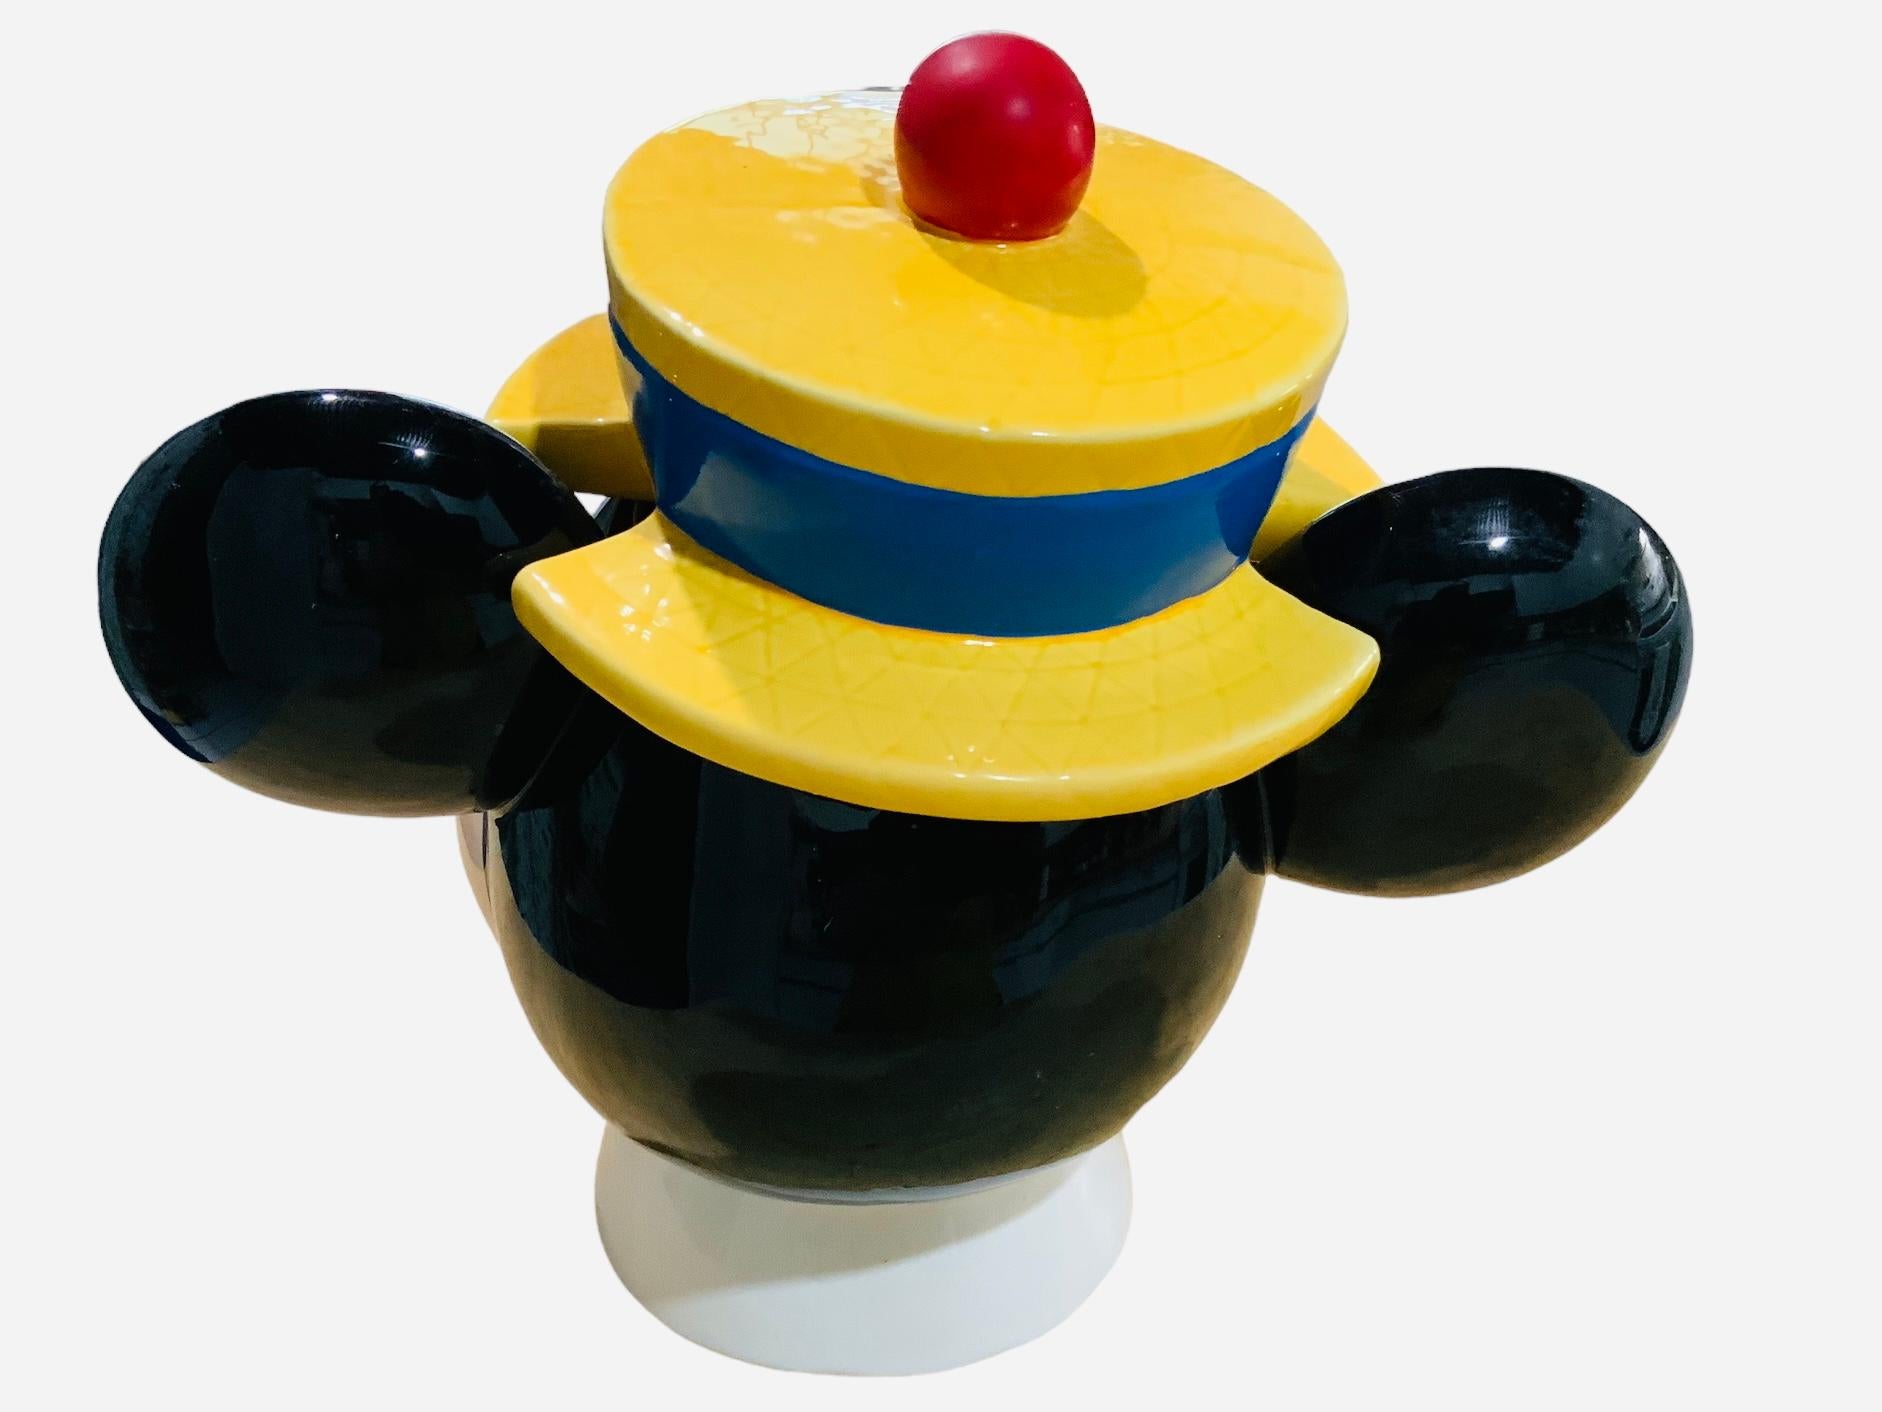 This is a Walt Disney, Mickey Mouse Head Cookie Jar. It depicts a hand painted glazed ceramic cookie jar shaped as Mickey Mouse head. He is wearing a yellow hat with a band that have written Cookies. Below the base is hallmarked C Disney.